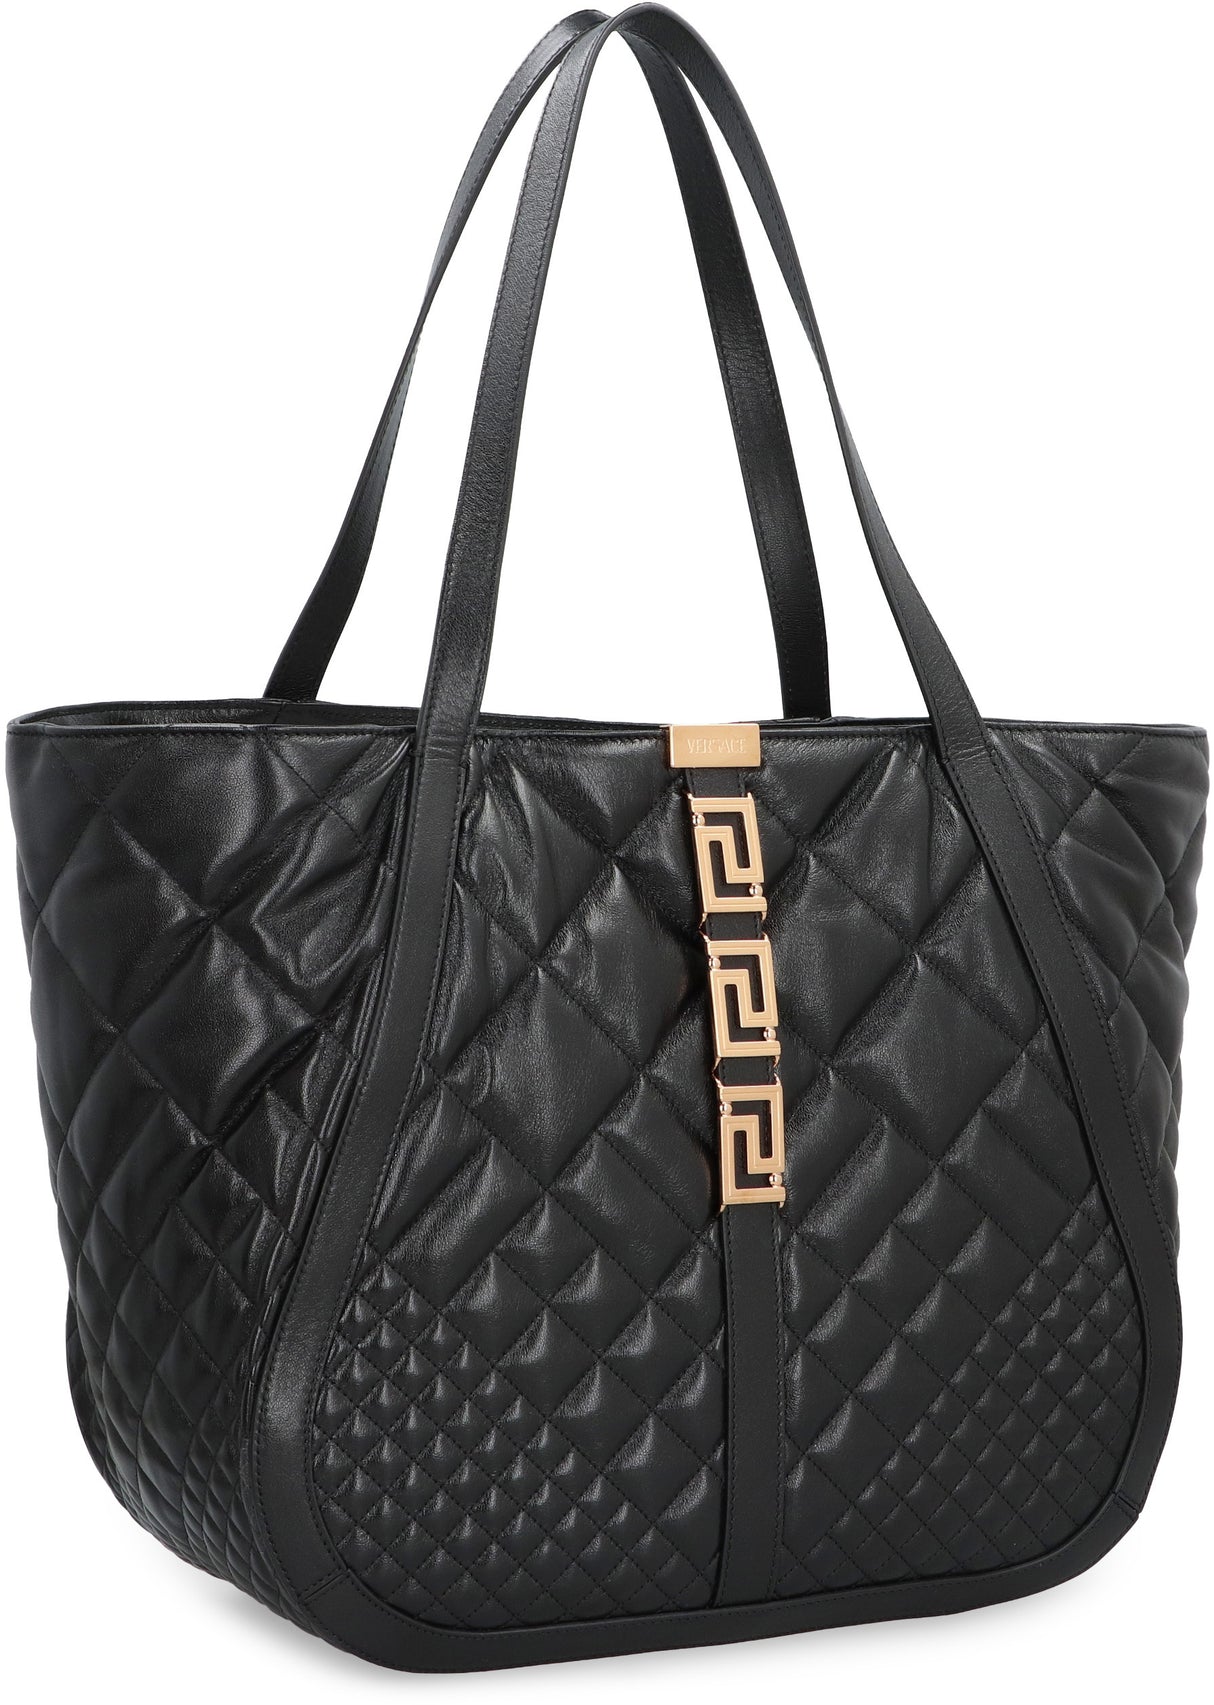 VERSACE Grecian Goddess Leather Tote Handbag - Quilted, Magnetic Fastening, Gold-Tone Hardware, Women's Fashion Accessory for FW23